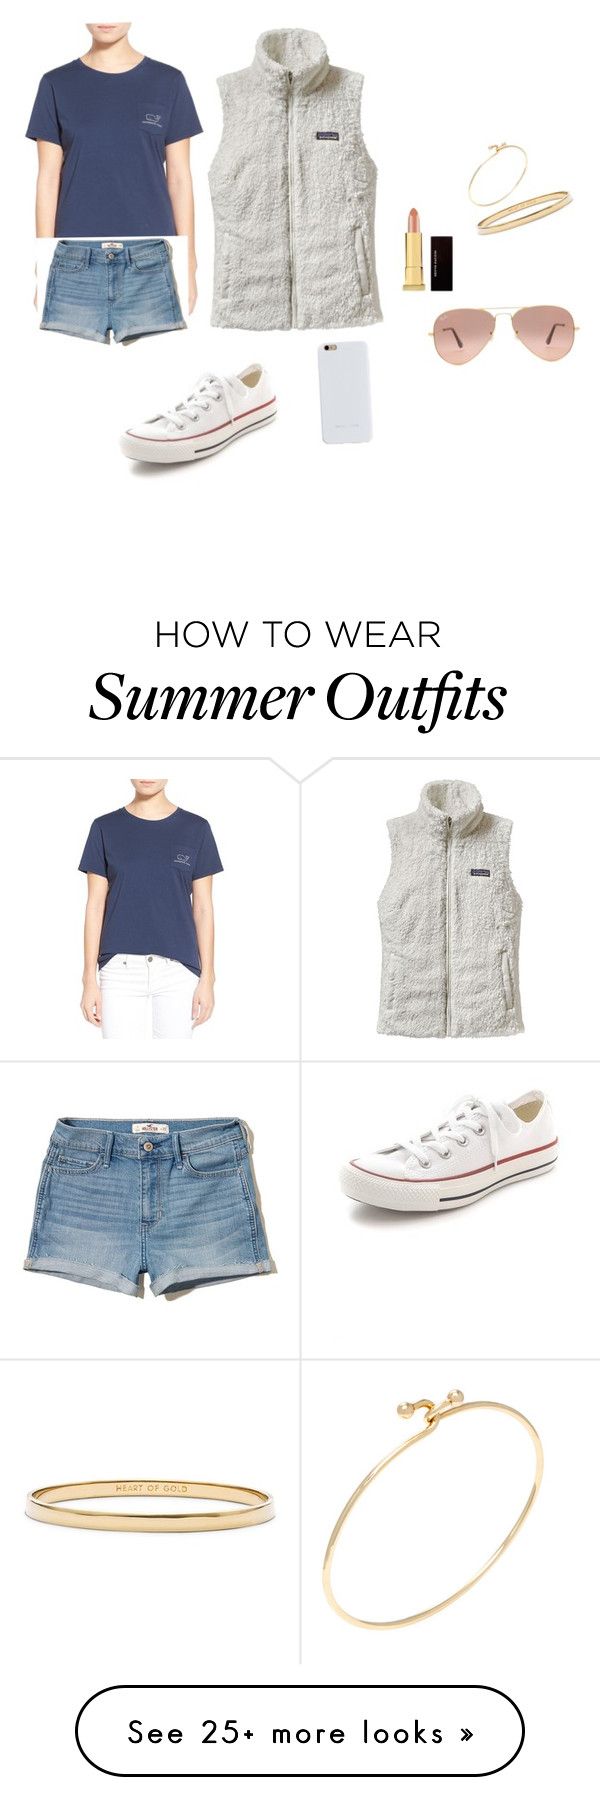 "summer outfit" by rileybensman on Polyvore featuring Vineyard Vines, ...